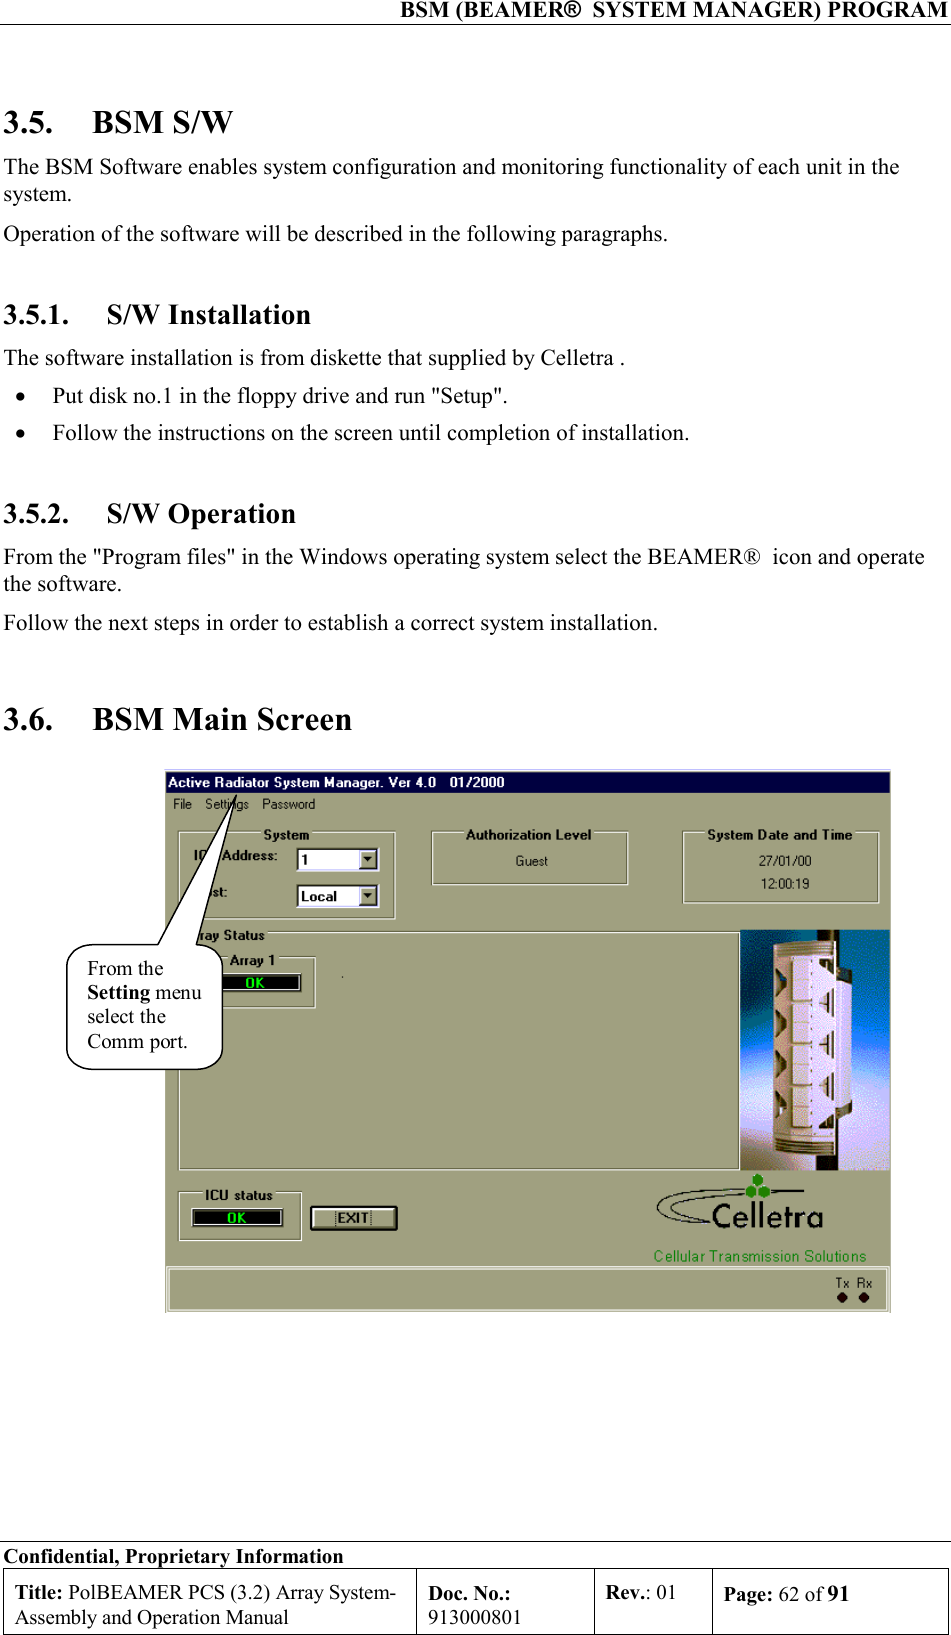  BSM (BEAMER®  SYSTEM MANAGER) PROGRAM Confidential, Proprietary Information Title: PolBEAMER PCS (3.2) Array System- Assembly and Operation Manual Doc. No.: 913000801 Rev.: 01  Page: 62 of 91  3.5. BSM S/W The BSM Software enables system configuration and monitoring functionality of each unit in the system. Operation of the software will be described in the following paragraphs. 3.5.1. S/W Installation The software installation is from diskette that supplied by Celletra . •  Put disk no.1 in the floppy drive and run &quot;Setup&quot;. •  Follow the instructions on the screen until completion of installation. 3.5.2. S/W Operation From the &quot;Program files&quot; in the Windows operating system select the BEAMER®  icon and operate the software. Follow the next steps in order to establish a correct system installation. 3.6.  BSM Main Screen From theSetting menuselect theComm port.  